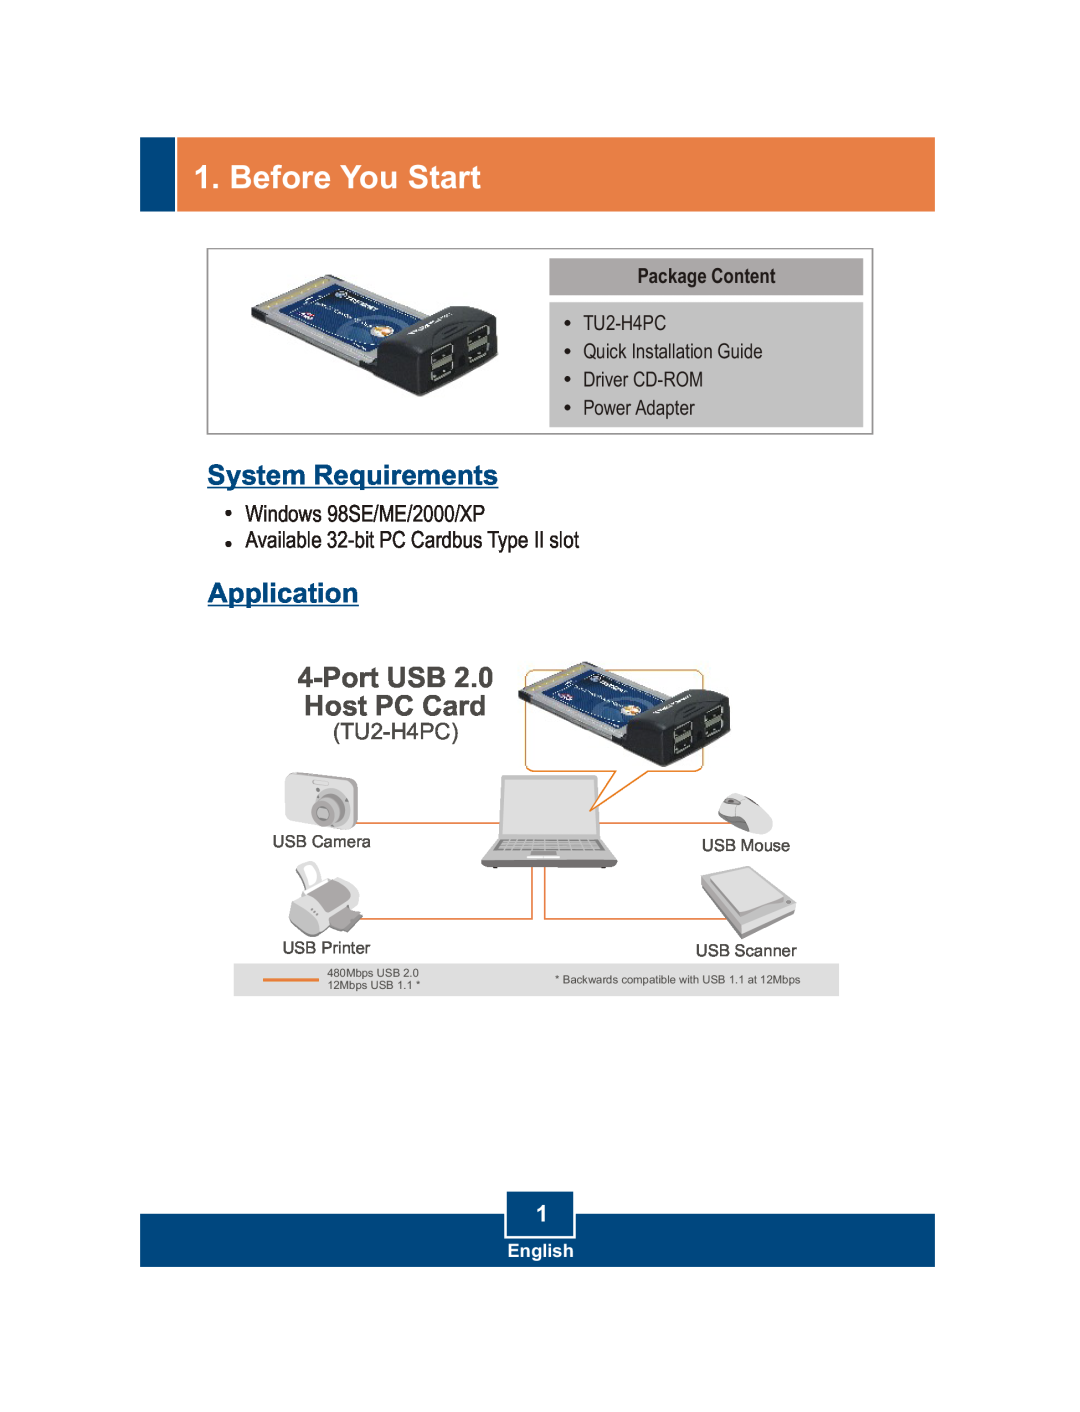 TRENDnet TU2-H4PC Before You Start, System Requirements, Application, Package Content, Port USB Host PC Card, English 